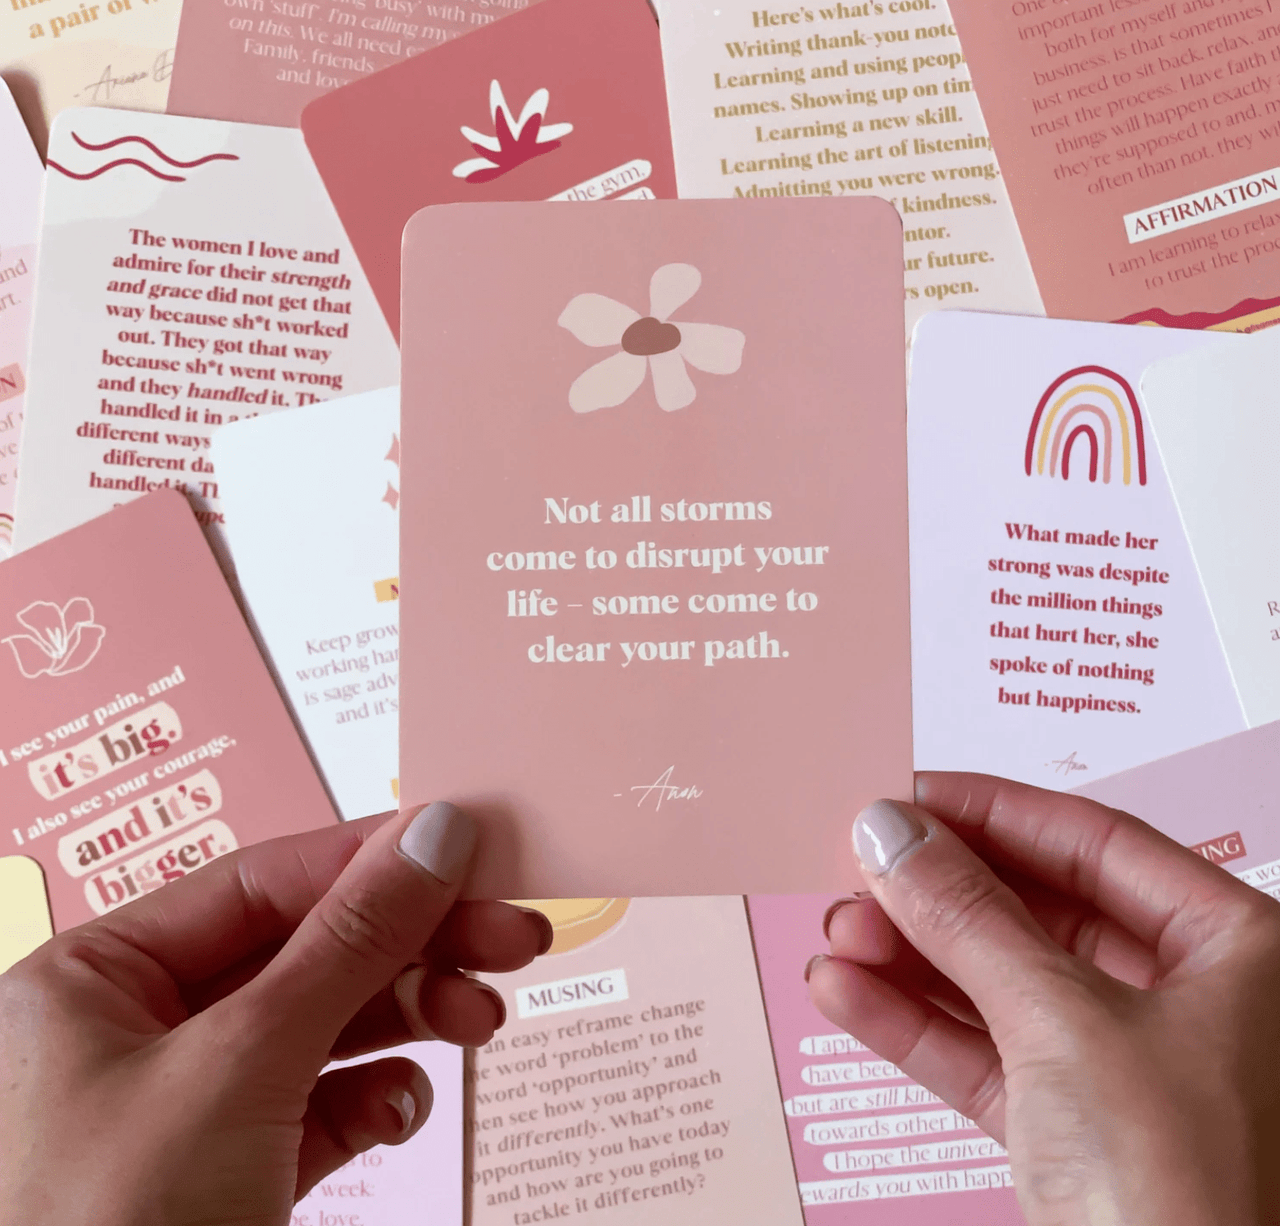 A hand holding up a pink card from the Collective Hub - Affirmations to Guide Your Journey - Box Card Set, with a quote on it.